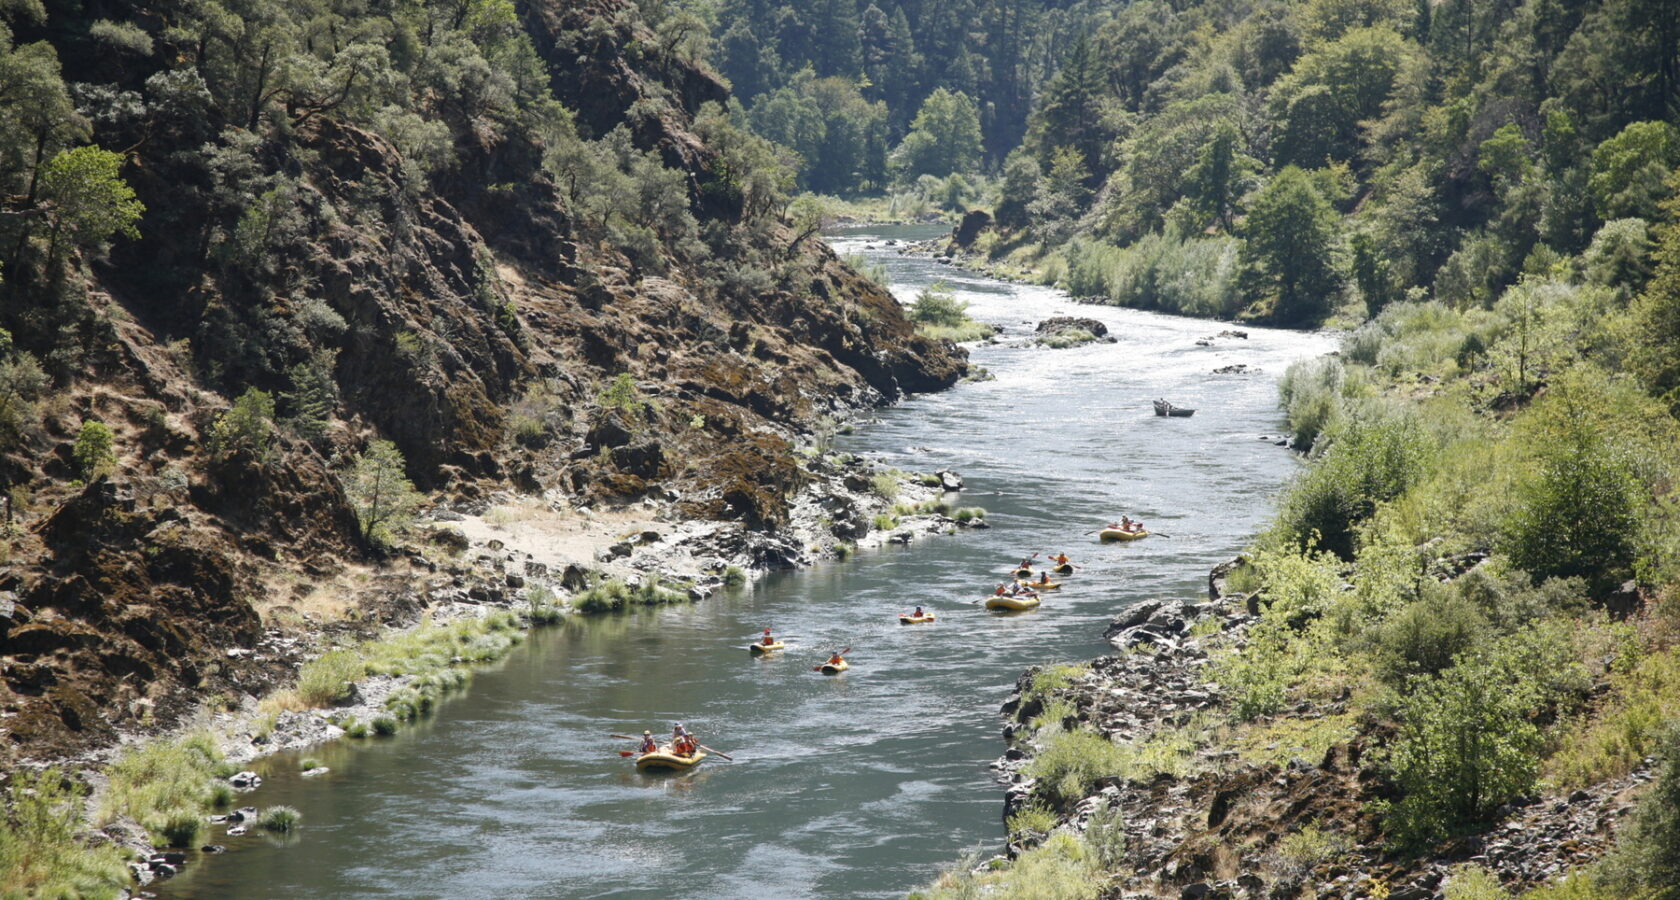 Rafting the Rogue River in Oregon